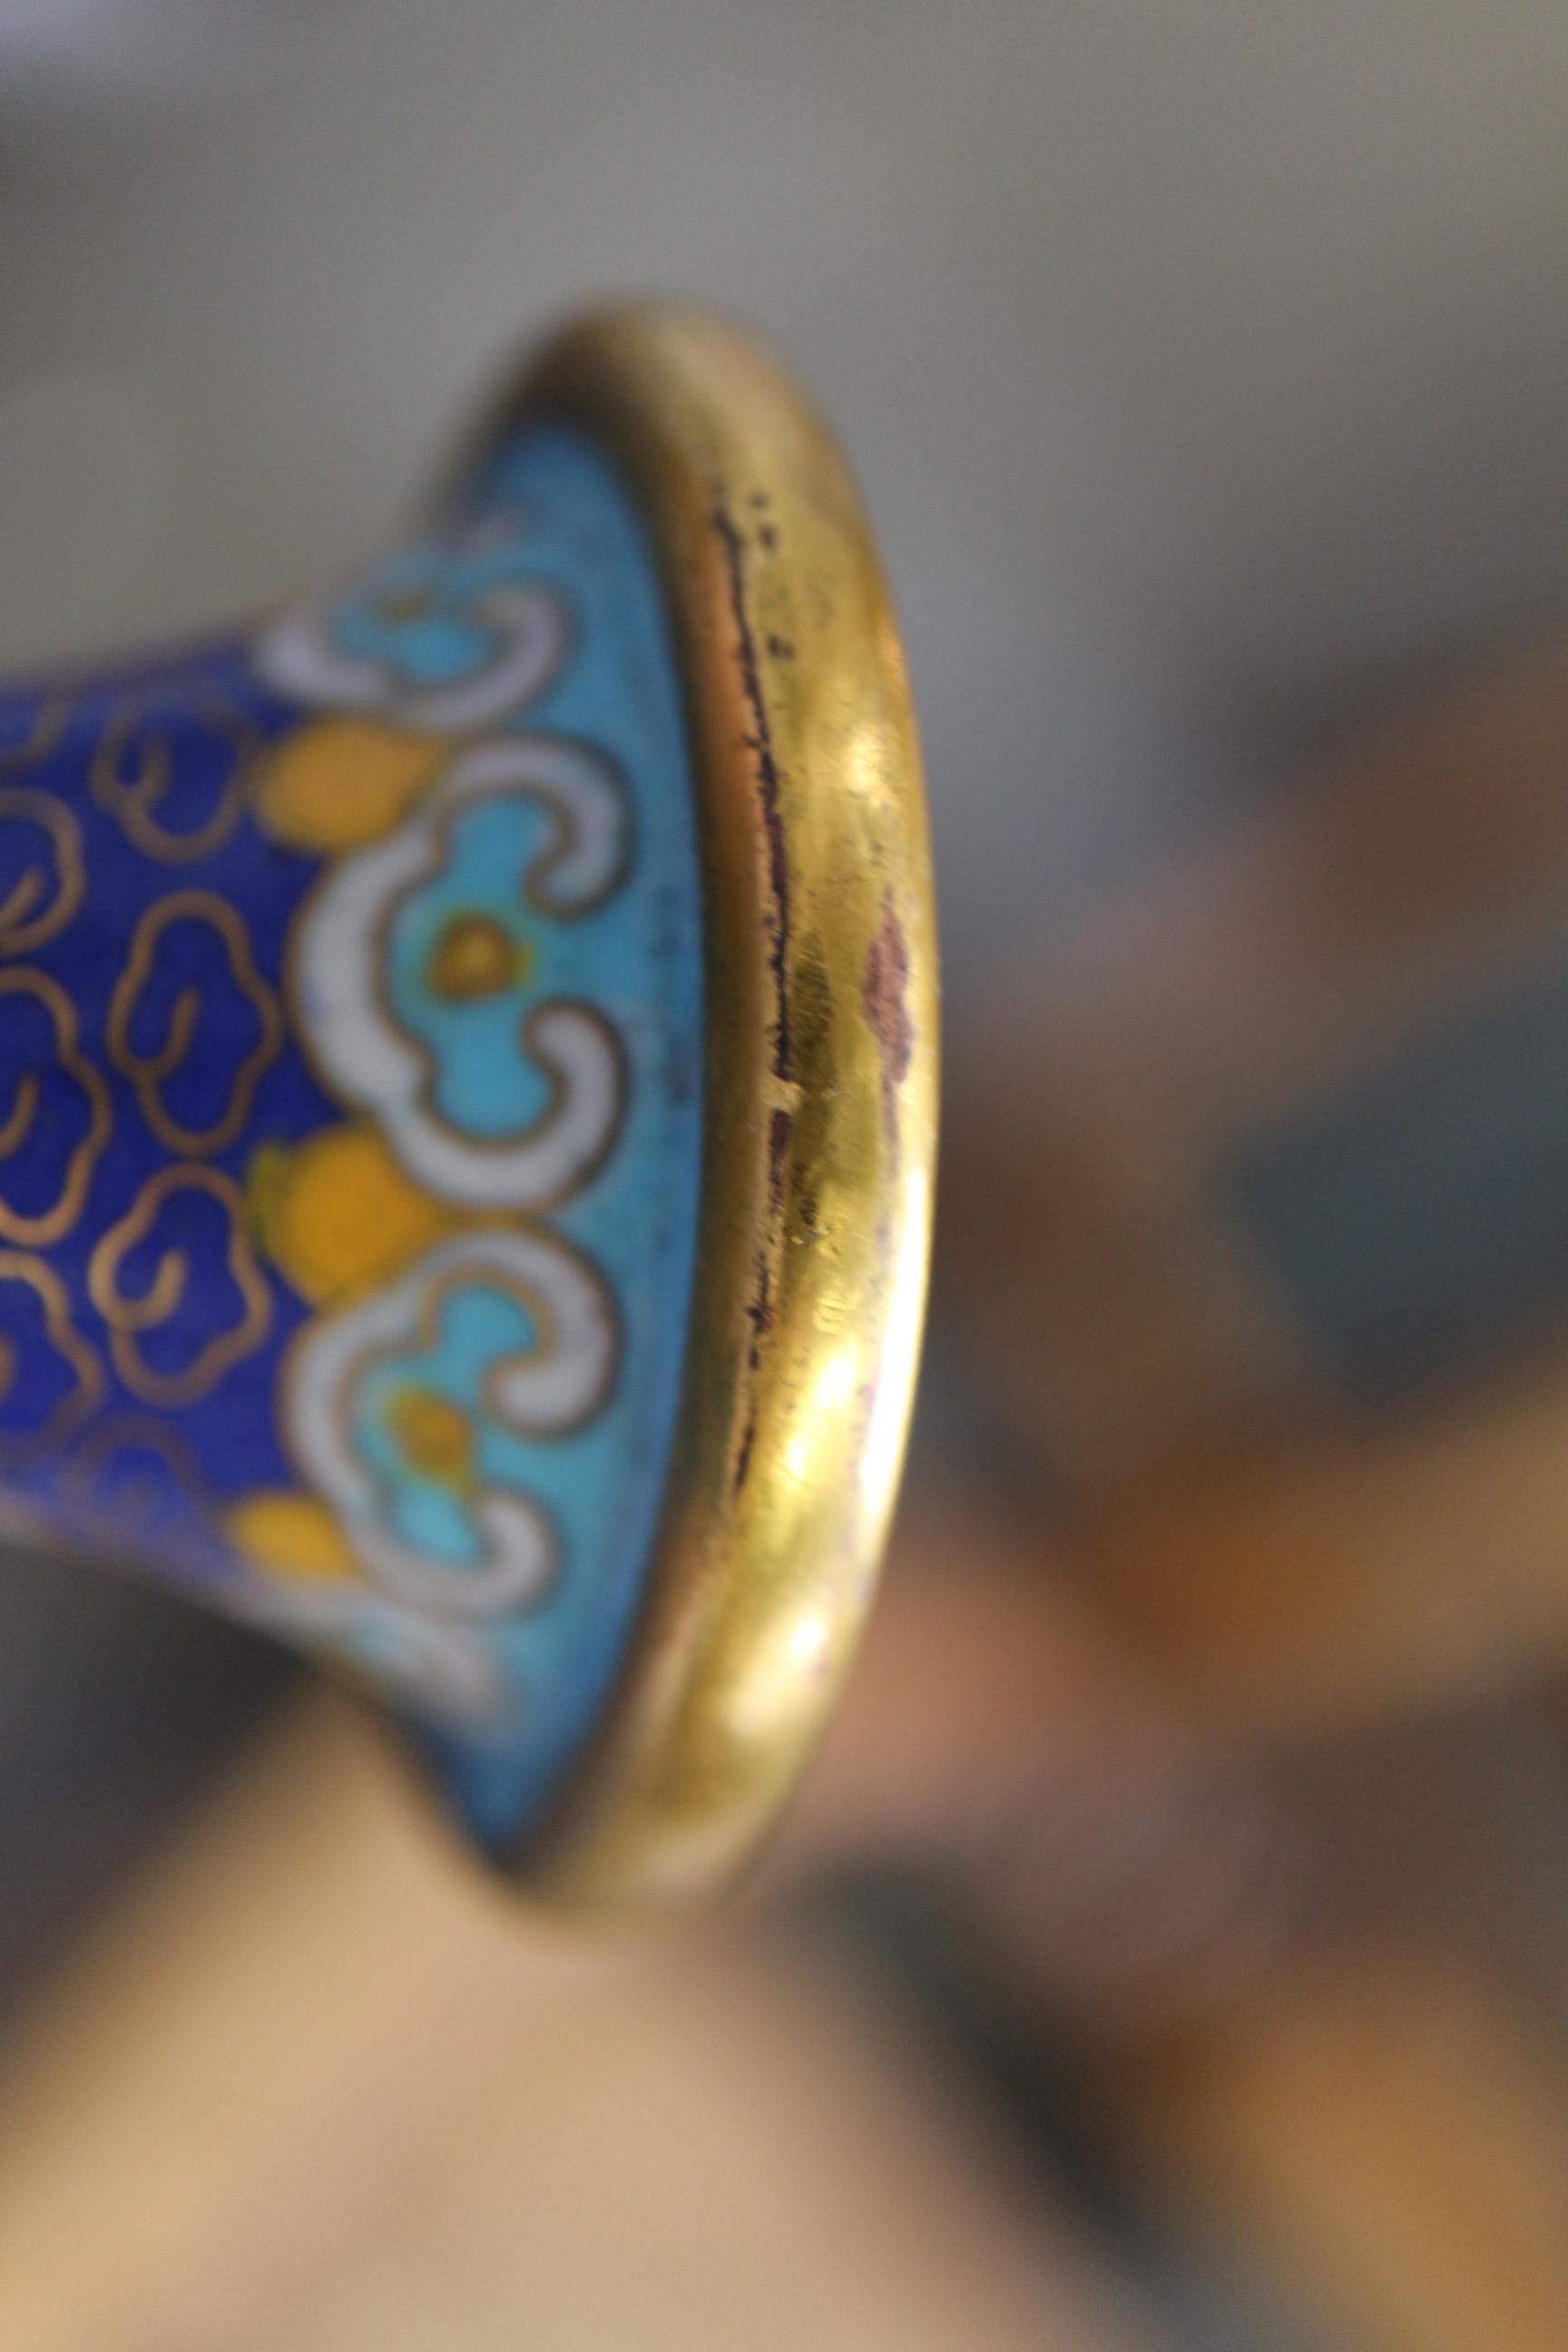 A Chinese cloisonne bulbous bottle neck vase with floral and scrolled designs on a blue ground, 8" - Image 9 of 18